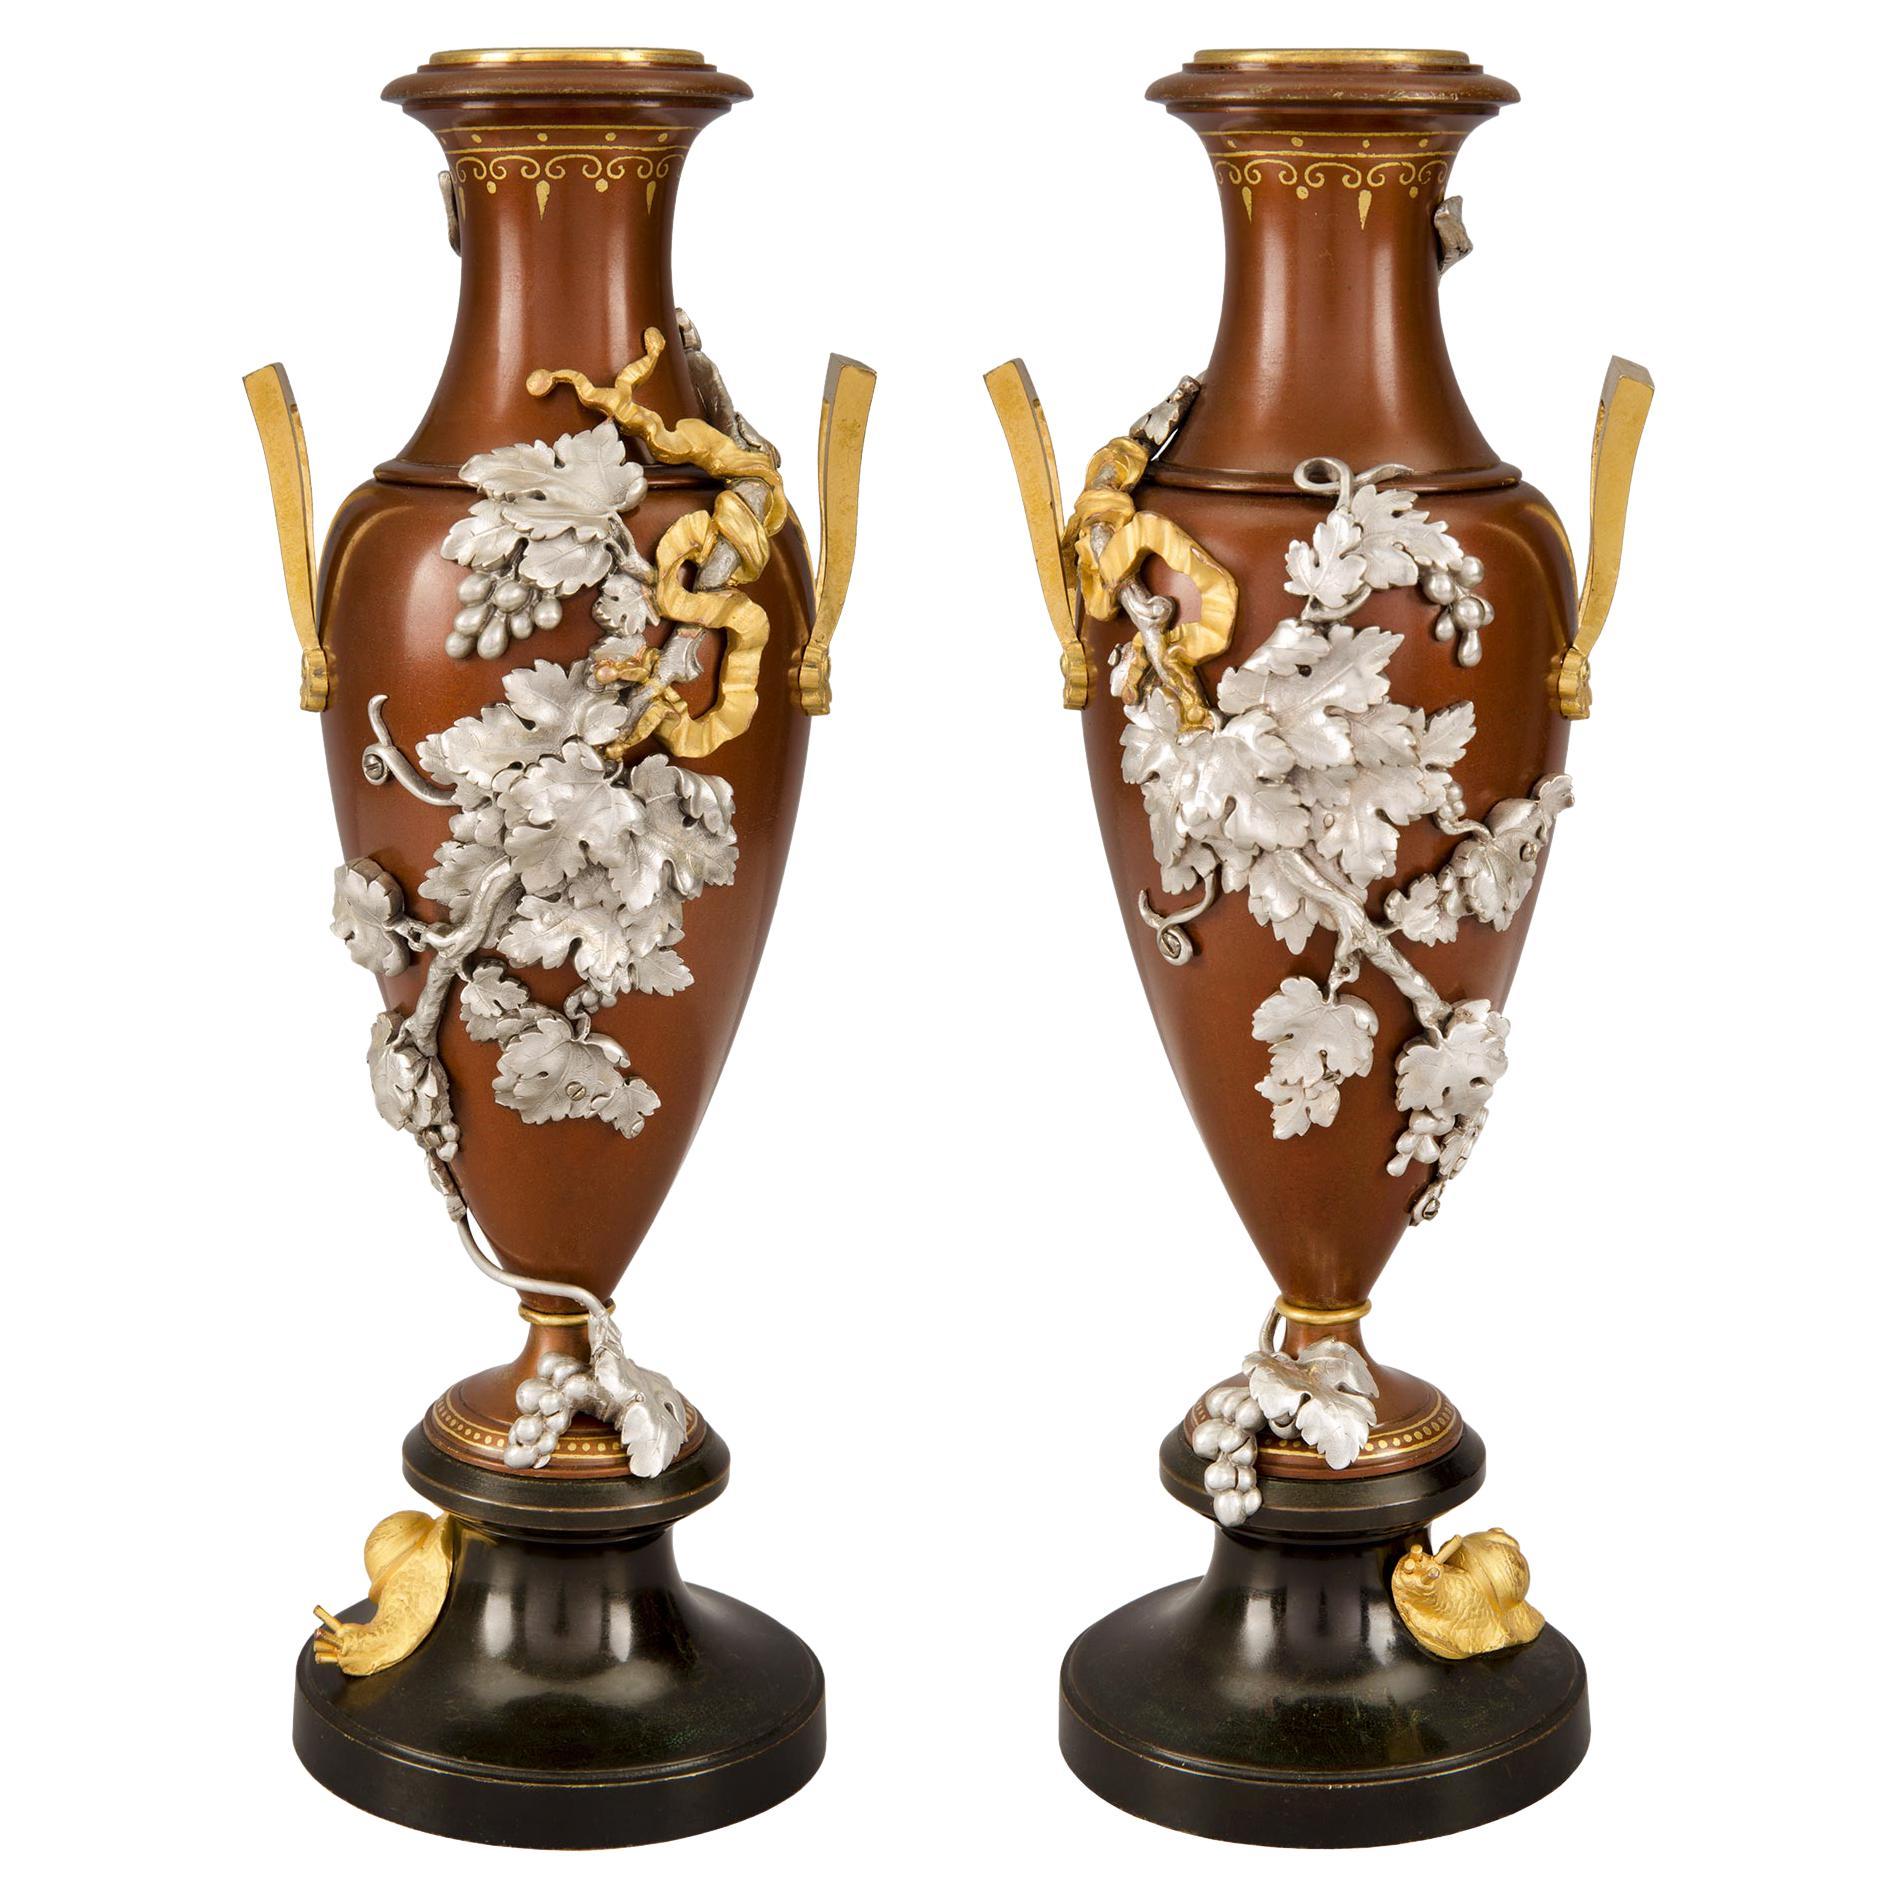 Pair of French 19th Century Louis XVI Style Ormolu and Bronze Urns For Sale